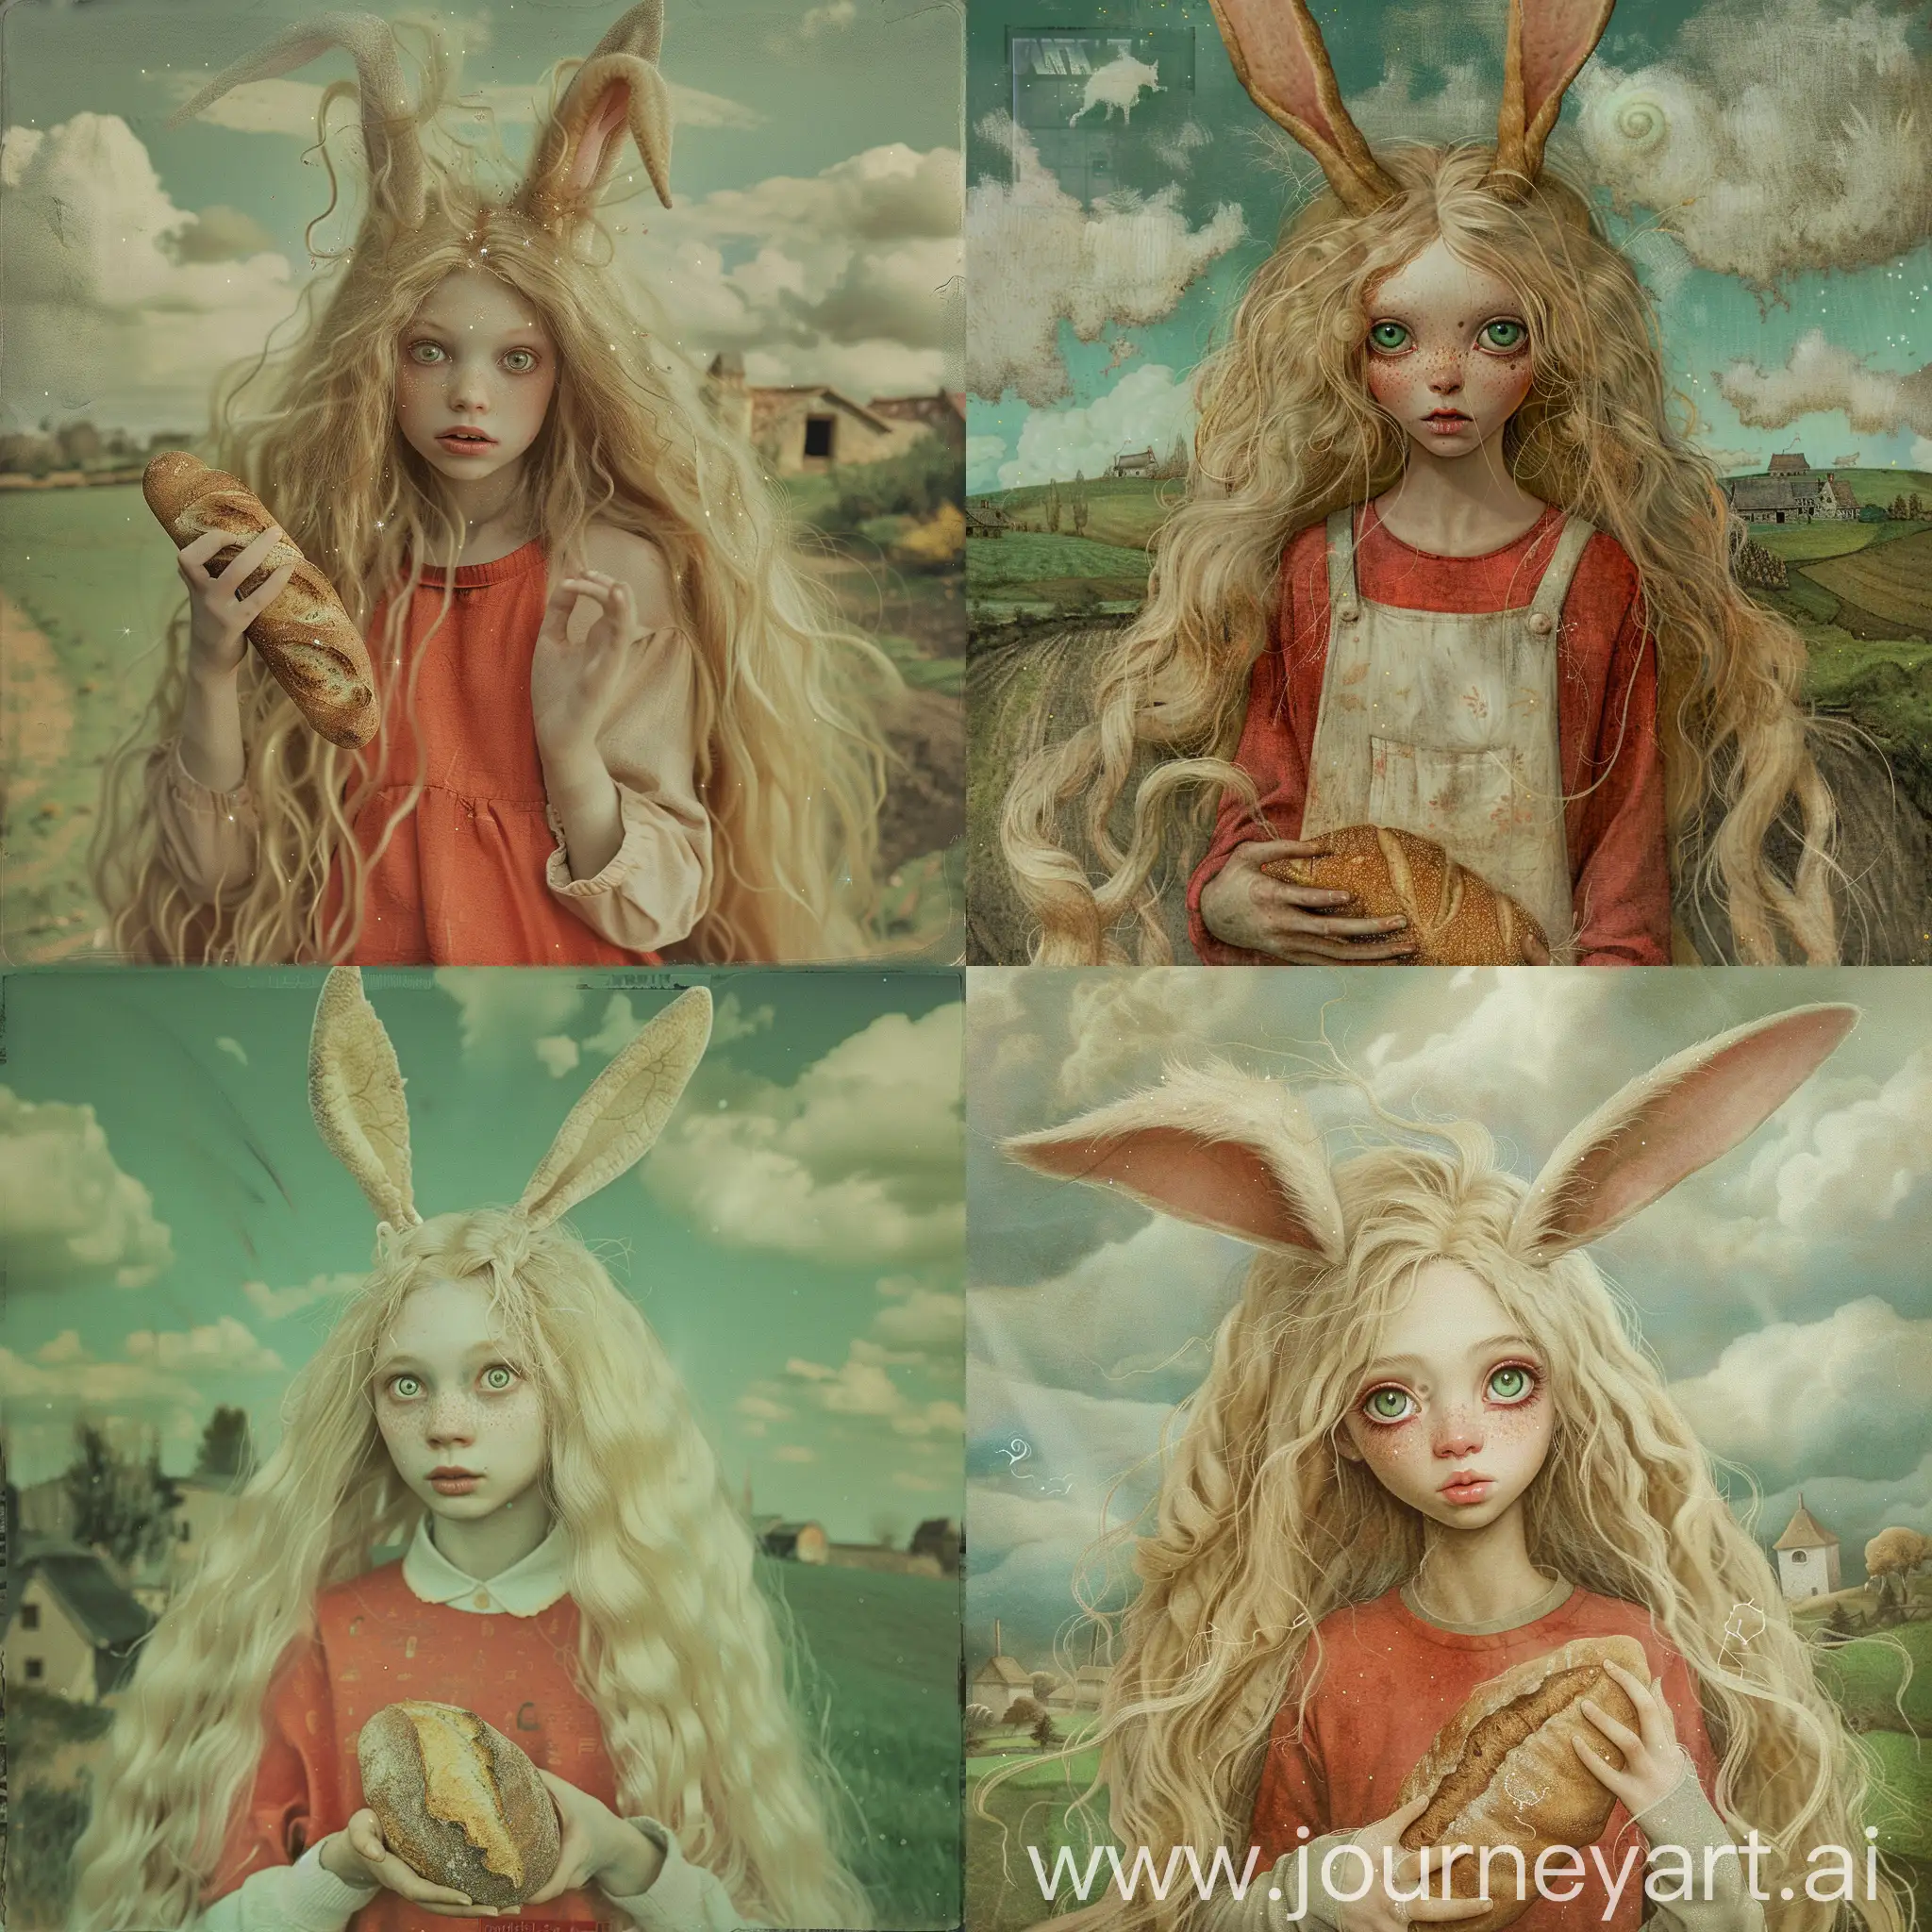 caspar david friedrich style, ivan bilibin, narue, dino, tsvbvra, polaroid photo, realistic style, poetry symbolism, 1girl, young, solo, blonde hair, very long hair, tousled hair, anthropomorphic, bunny ears, pale red shirt, oversized clothing, long sleeves, green eyes, spiral pupils, @_@, large eyes, holding bread, village, early morning, clouds , green field detail, look at viewer, scared, half body, sparkle